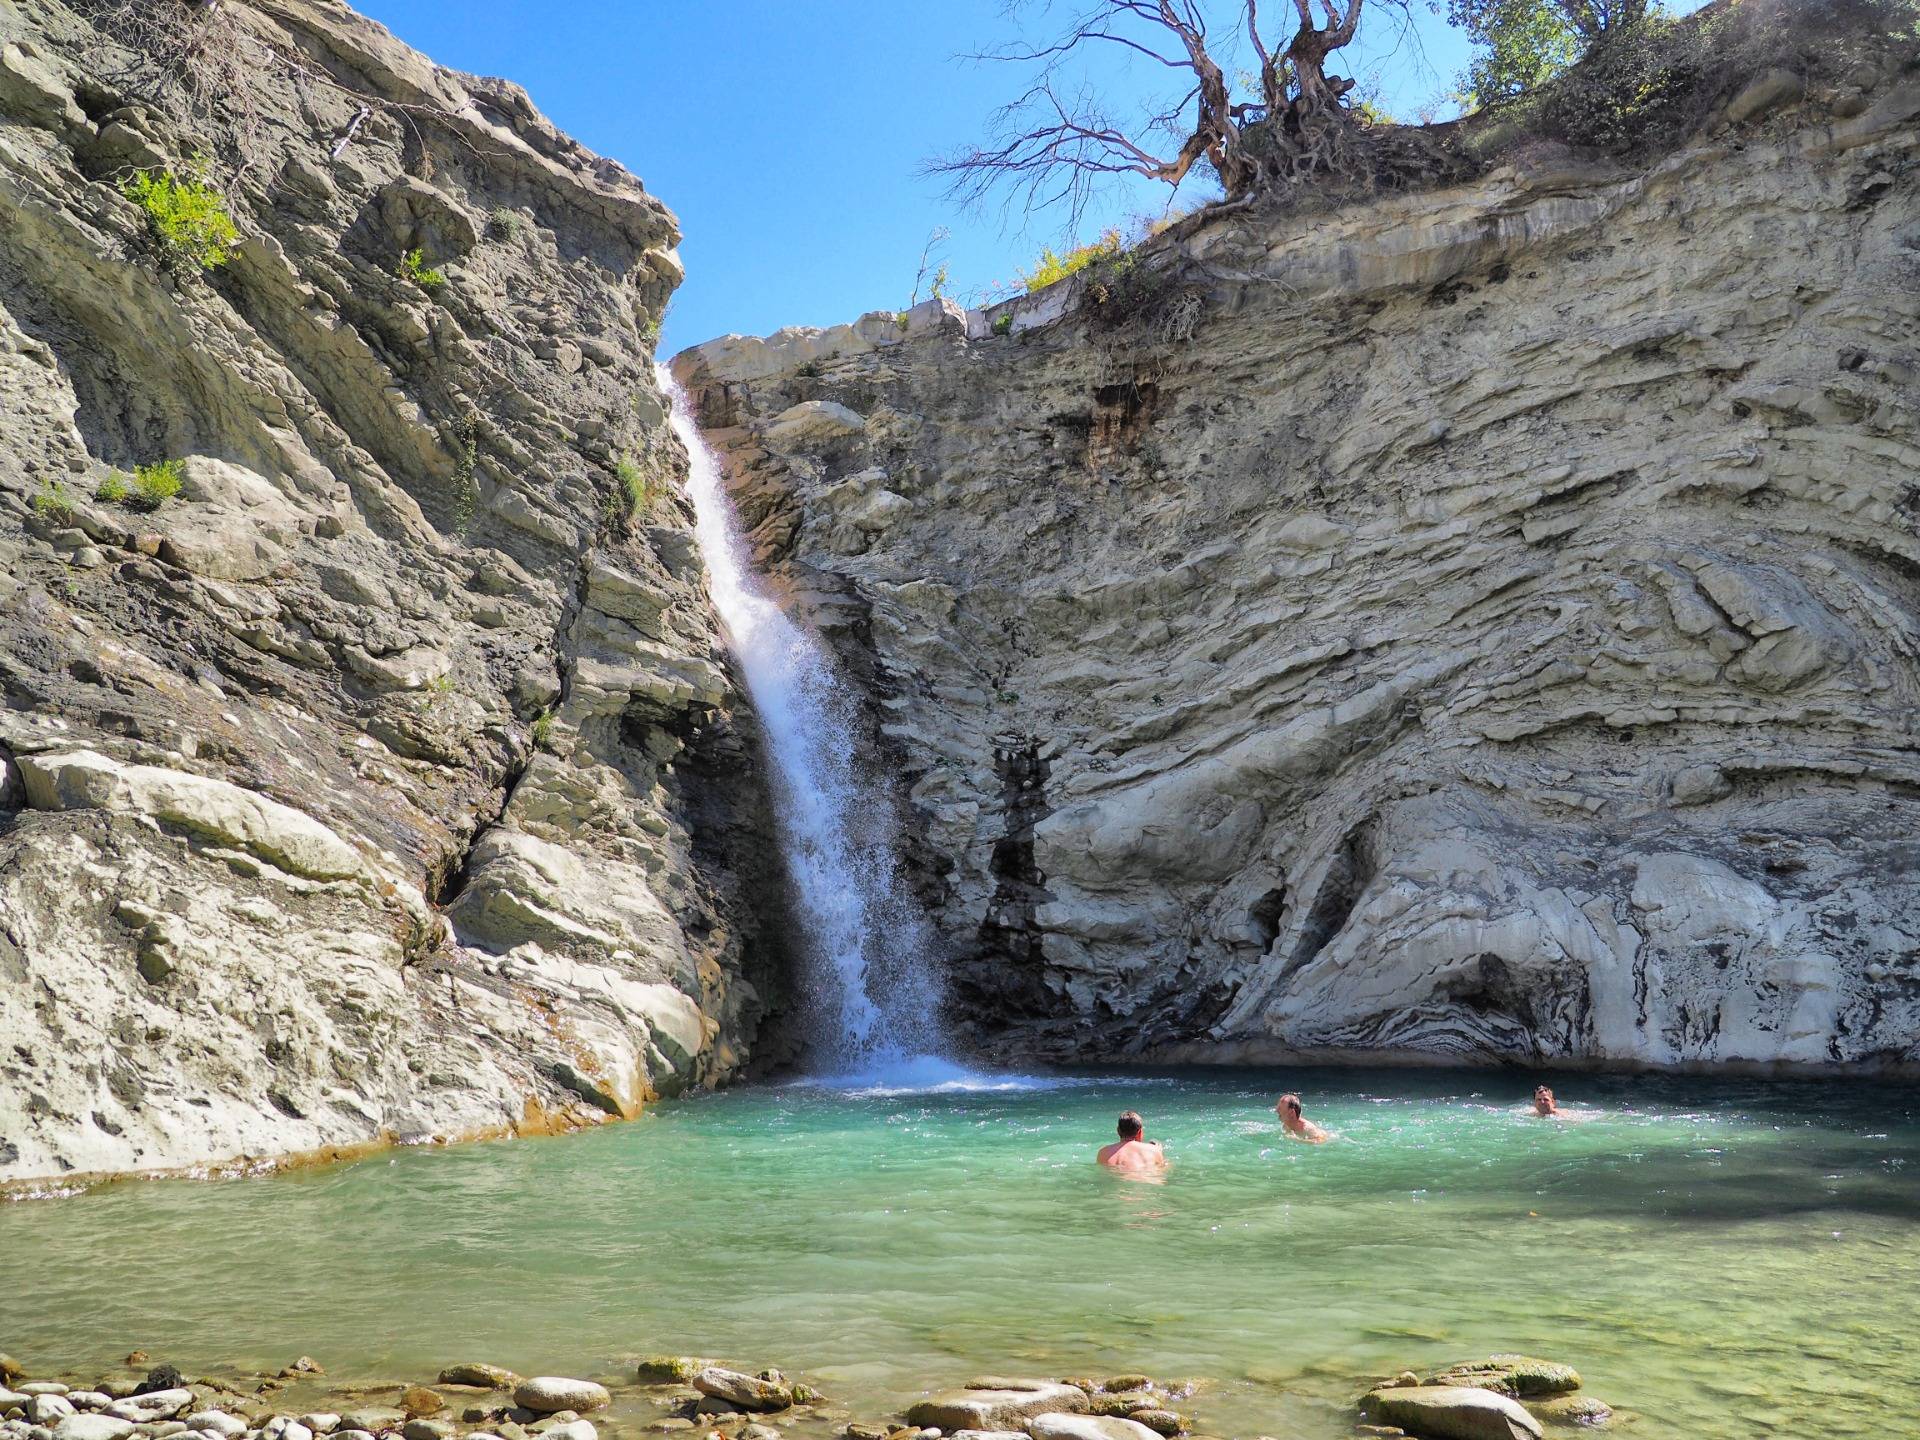 Albania's magnificent outback: Walking in wastelands, bathing in green water